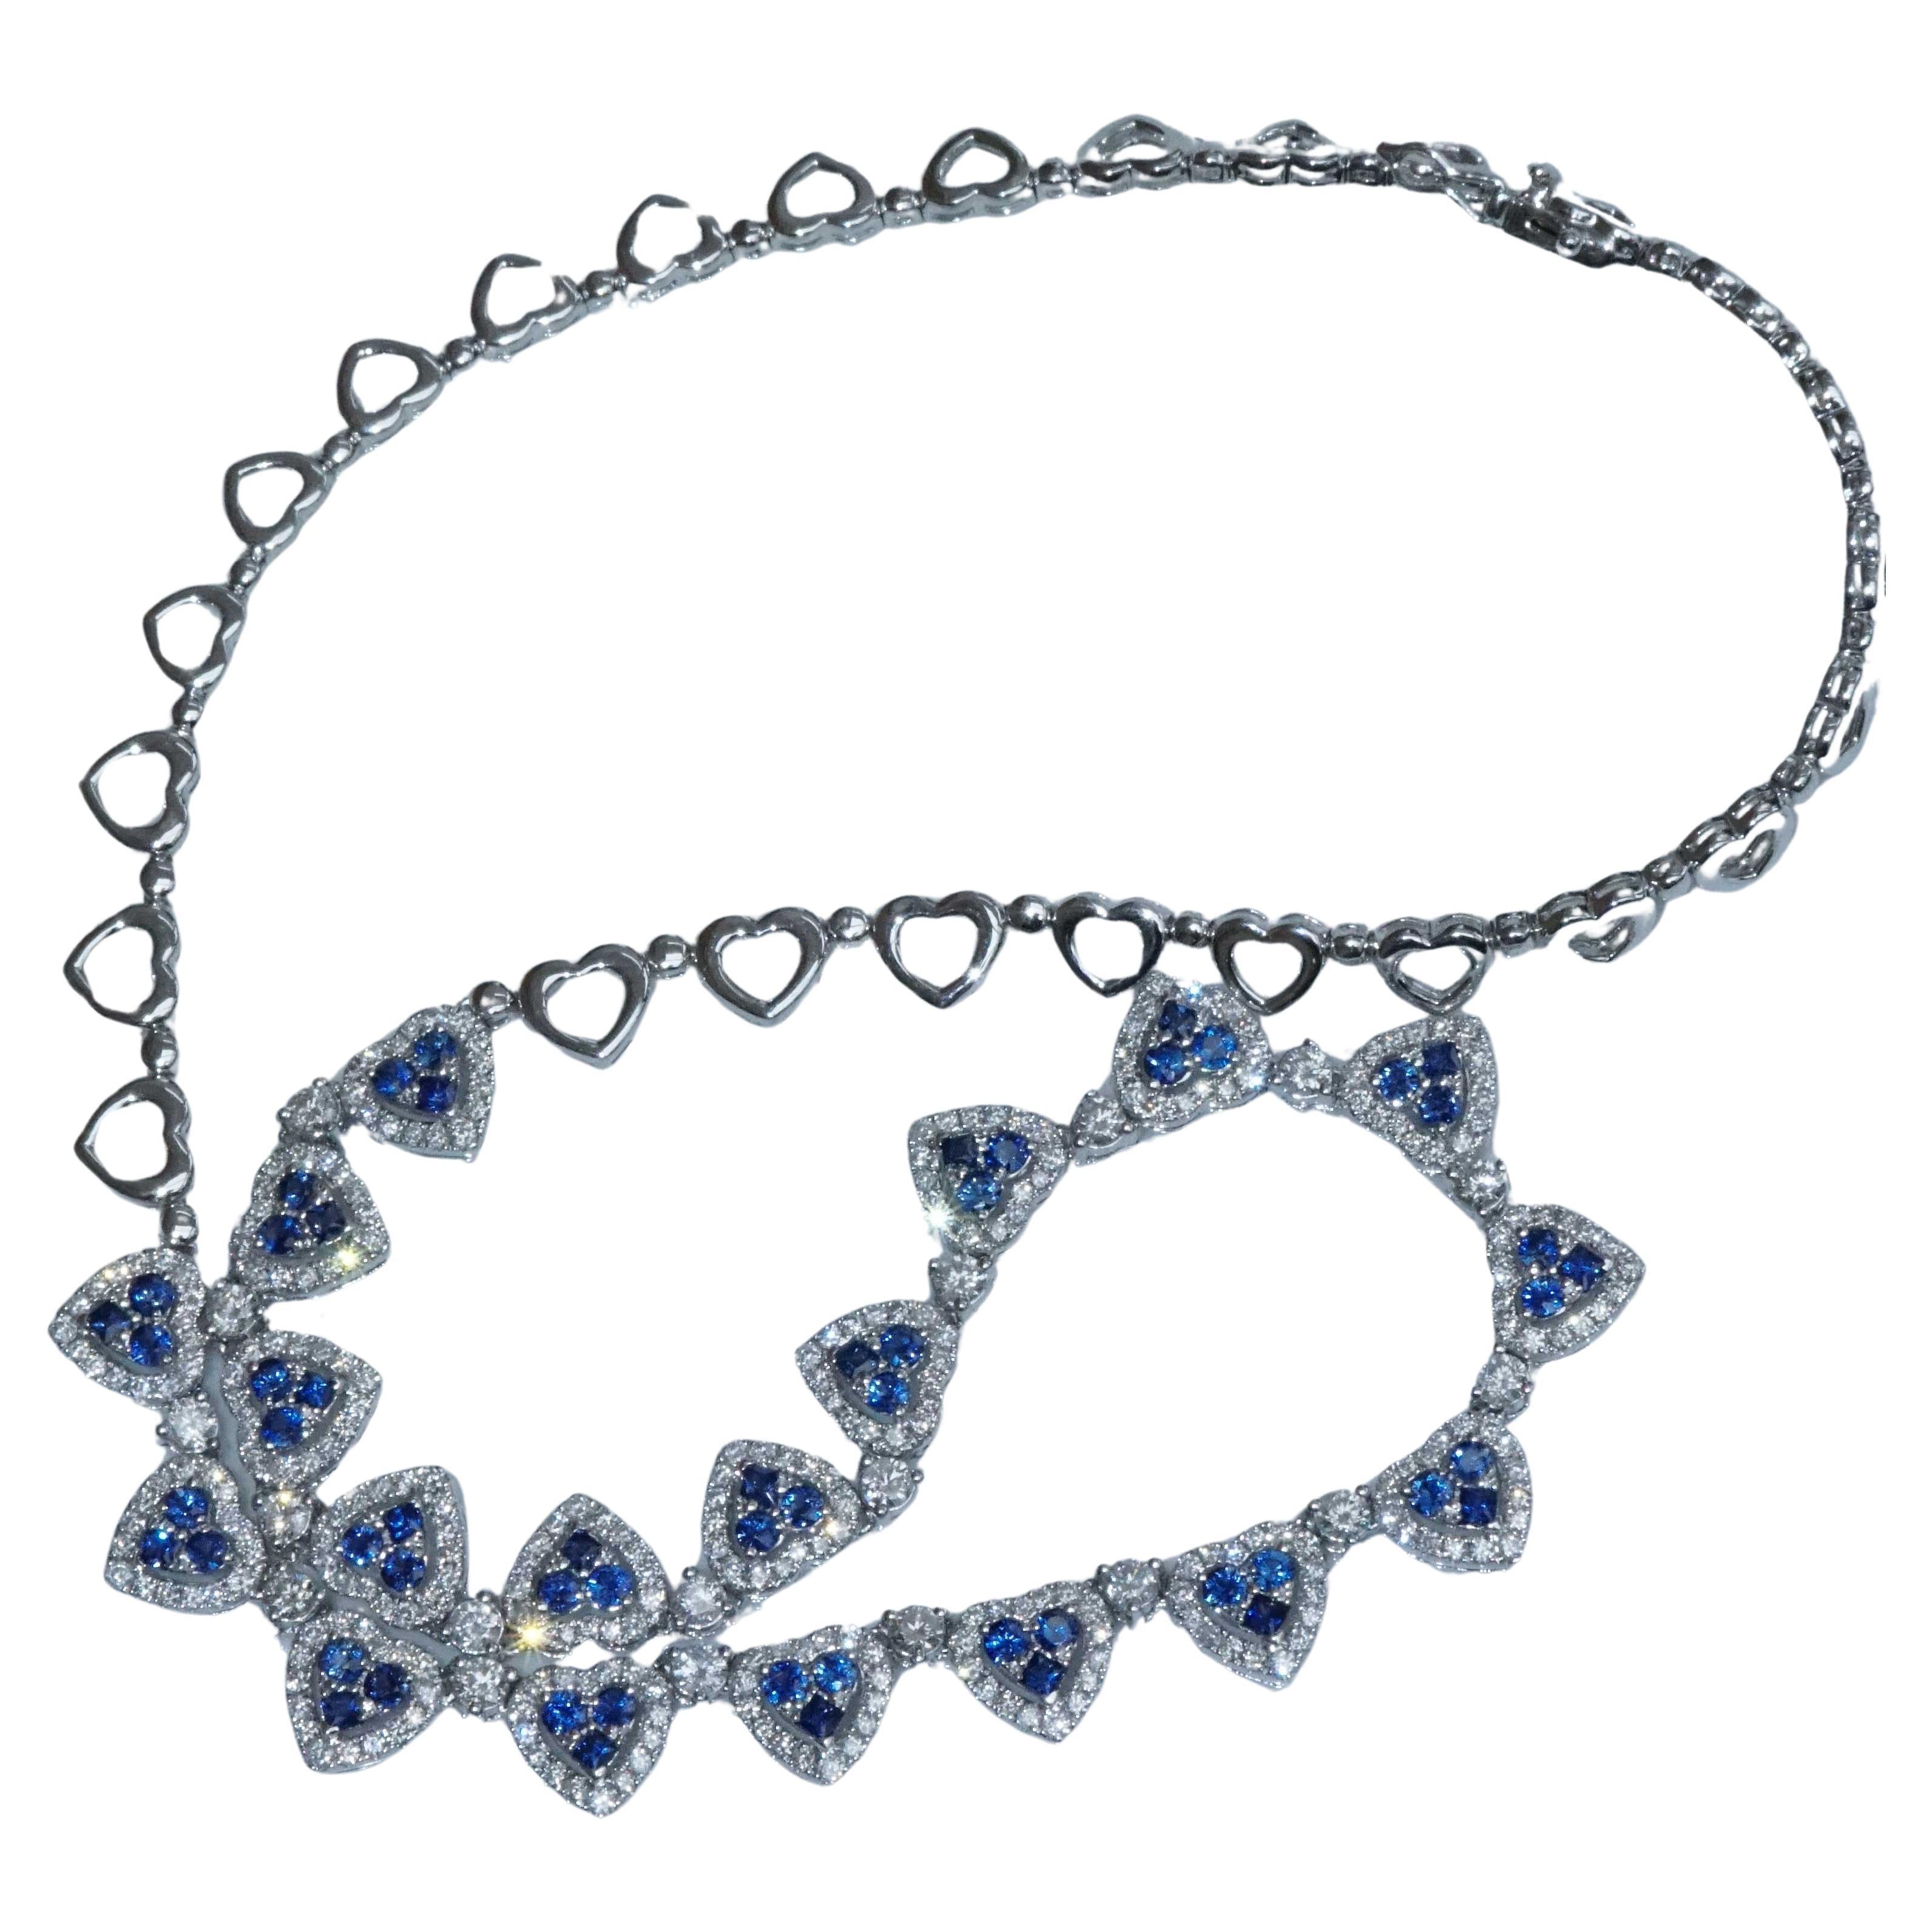 Brilliant Saphire Necklace 4.4/ 3 ct endless Hearts Luxury Jewelry for Dreamers 